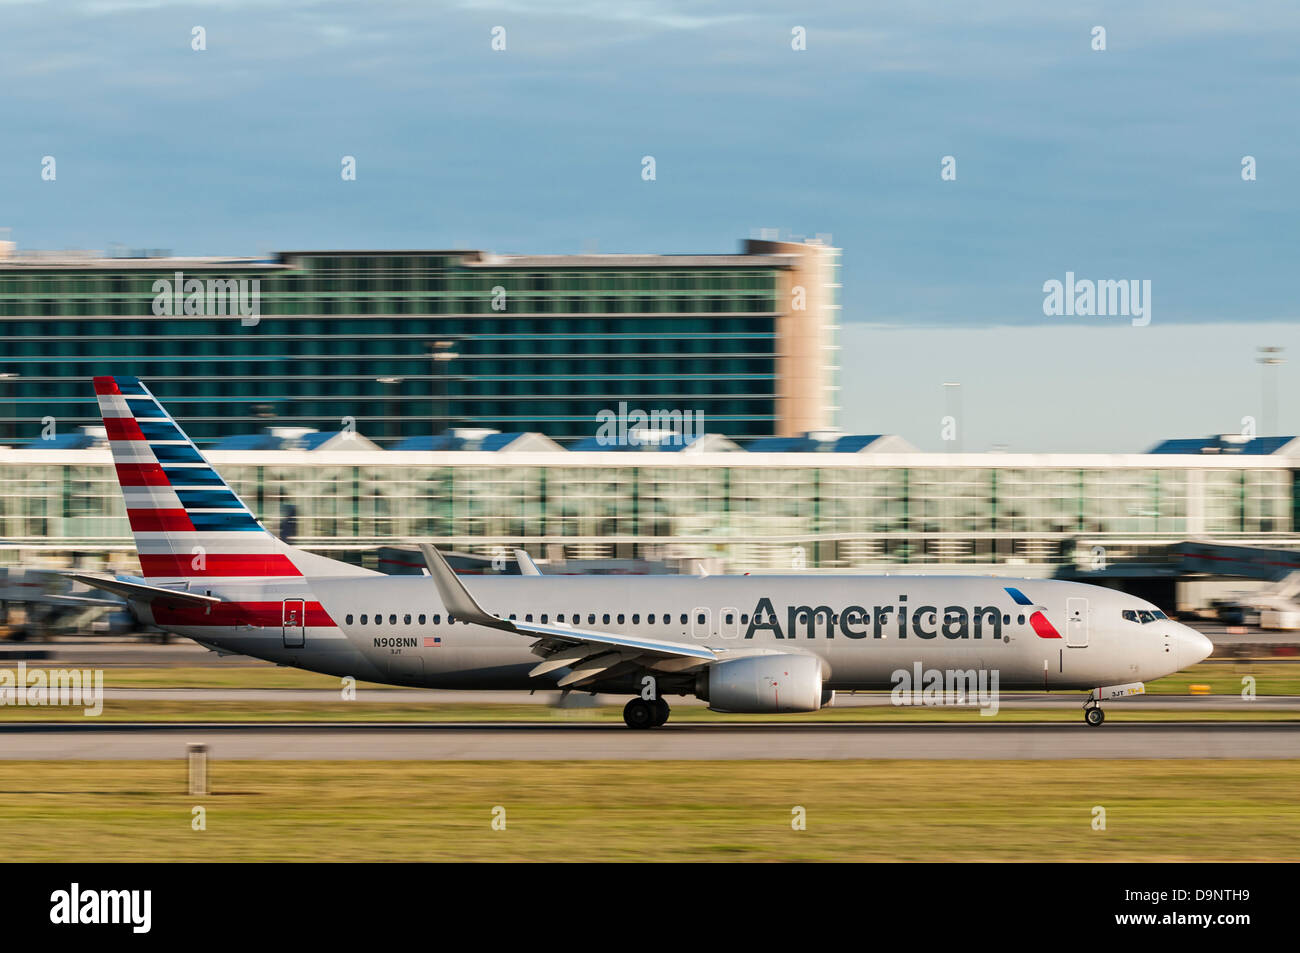 An American Airlines Airplane Boeing 737 In The Company S